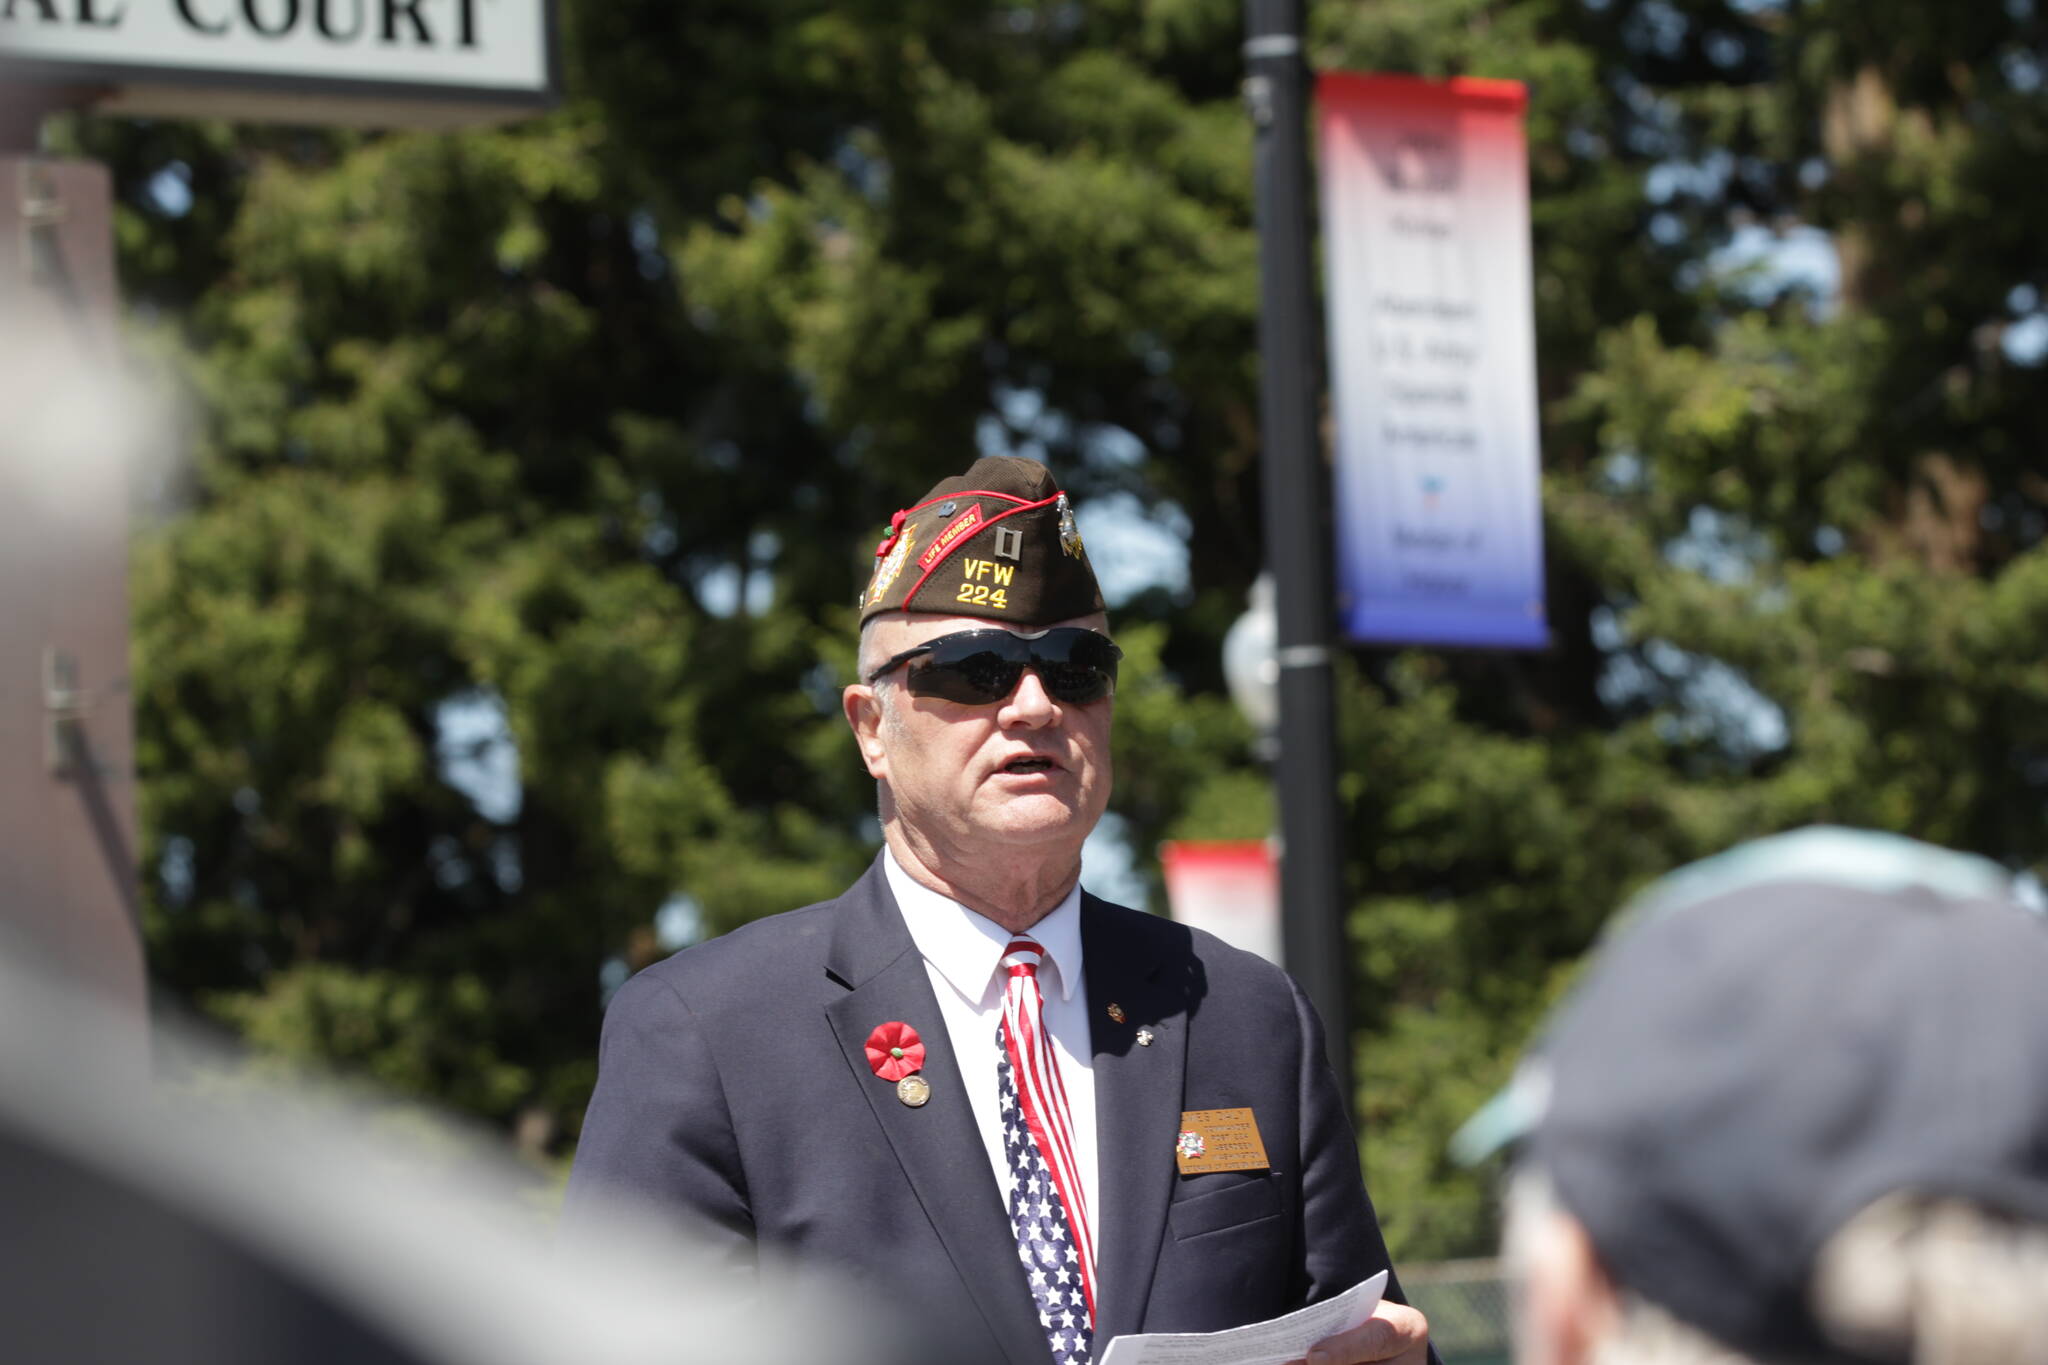 Veterans of Foreign Wars Post 224 Chaplain Jim Daly speaks during the dedication ceremony for banners honoring the war dead of the county in Cosmopolis, one visible behind Daly, on Memorial Day, May 29. (Michael S. Lockett / The Daily World)